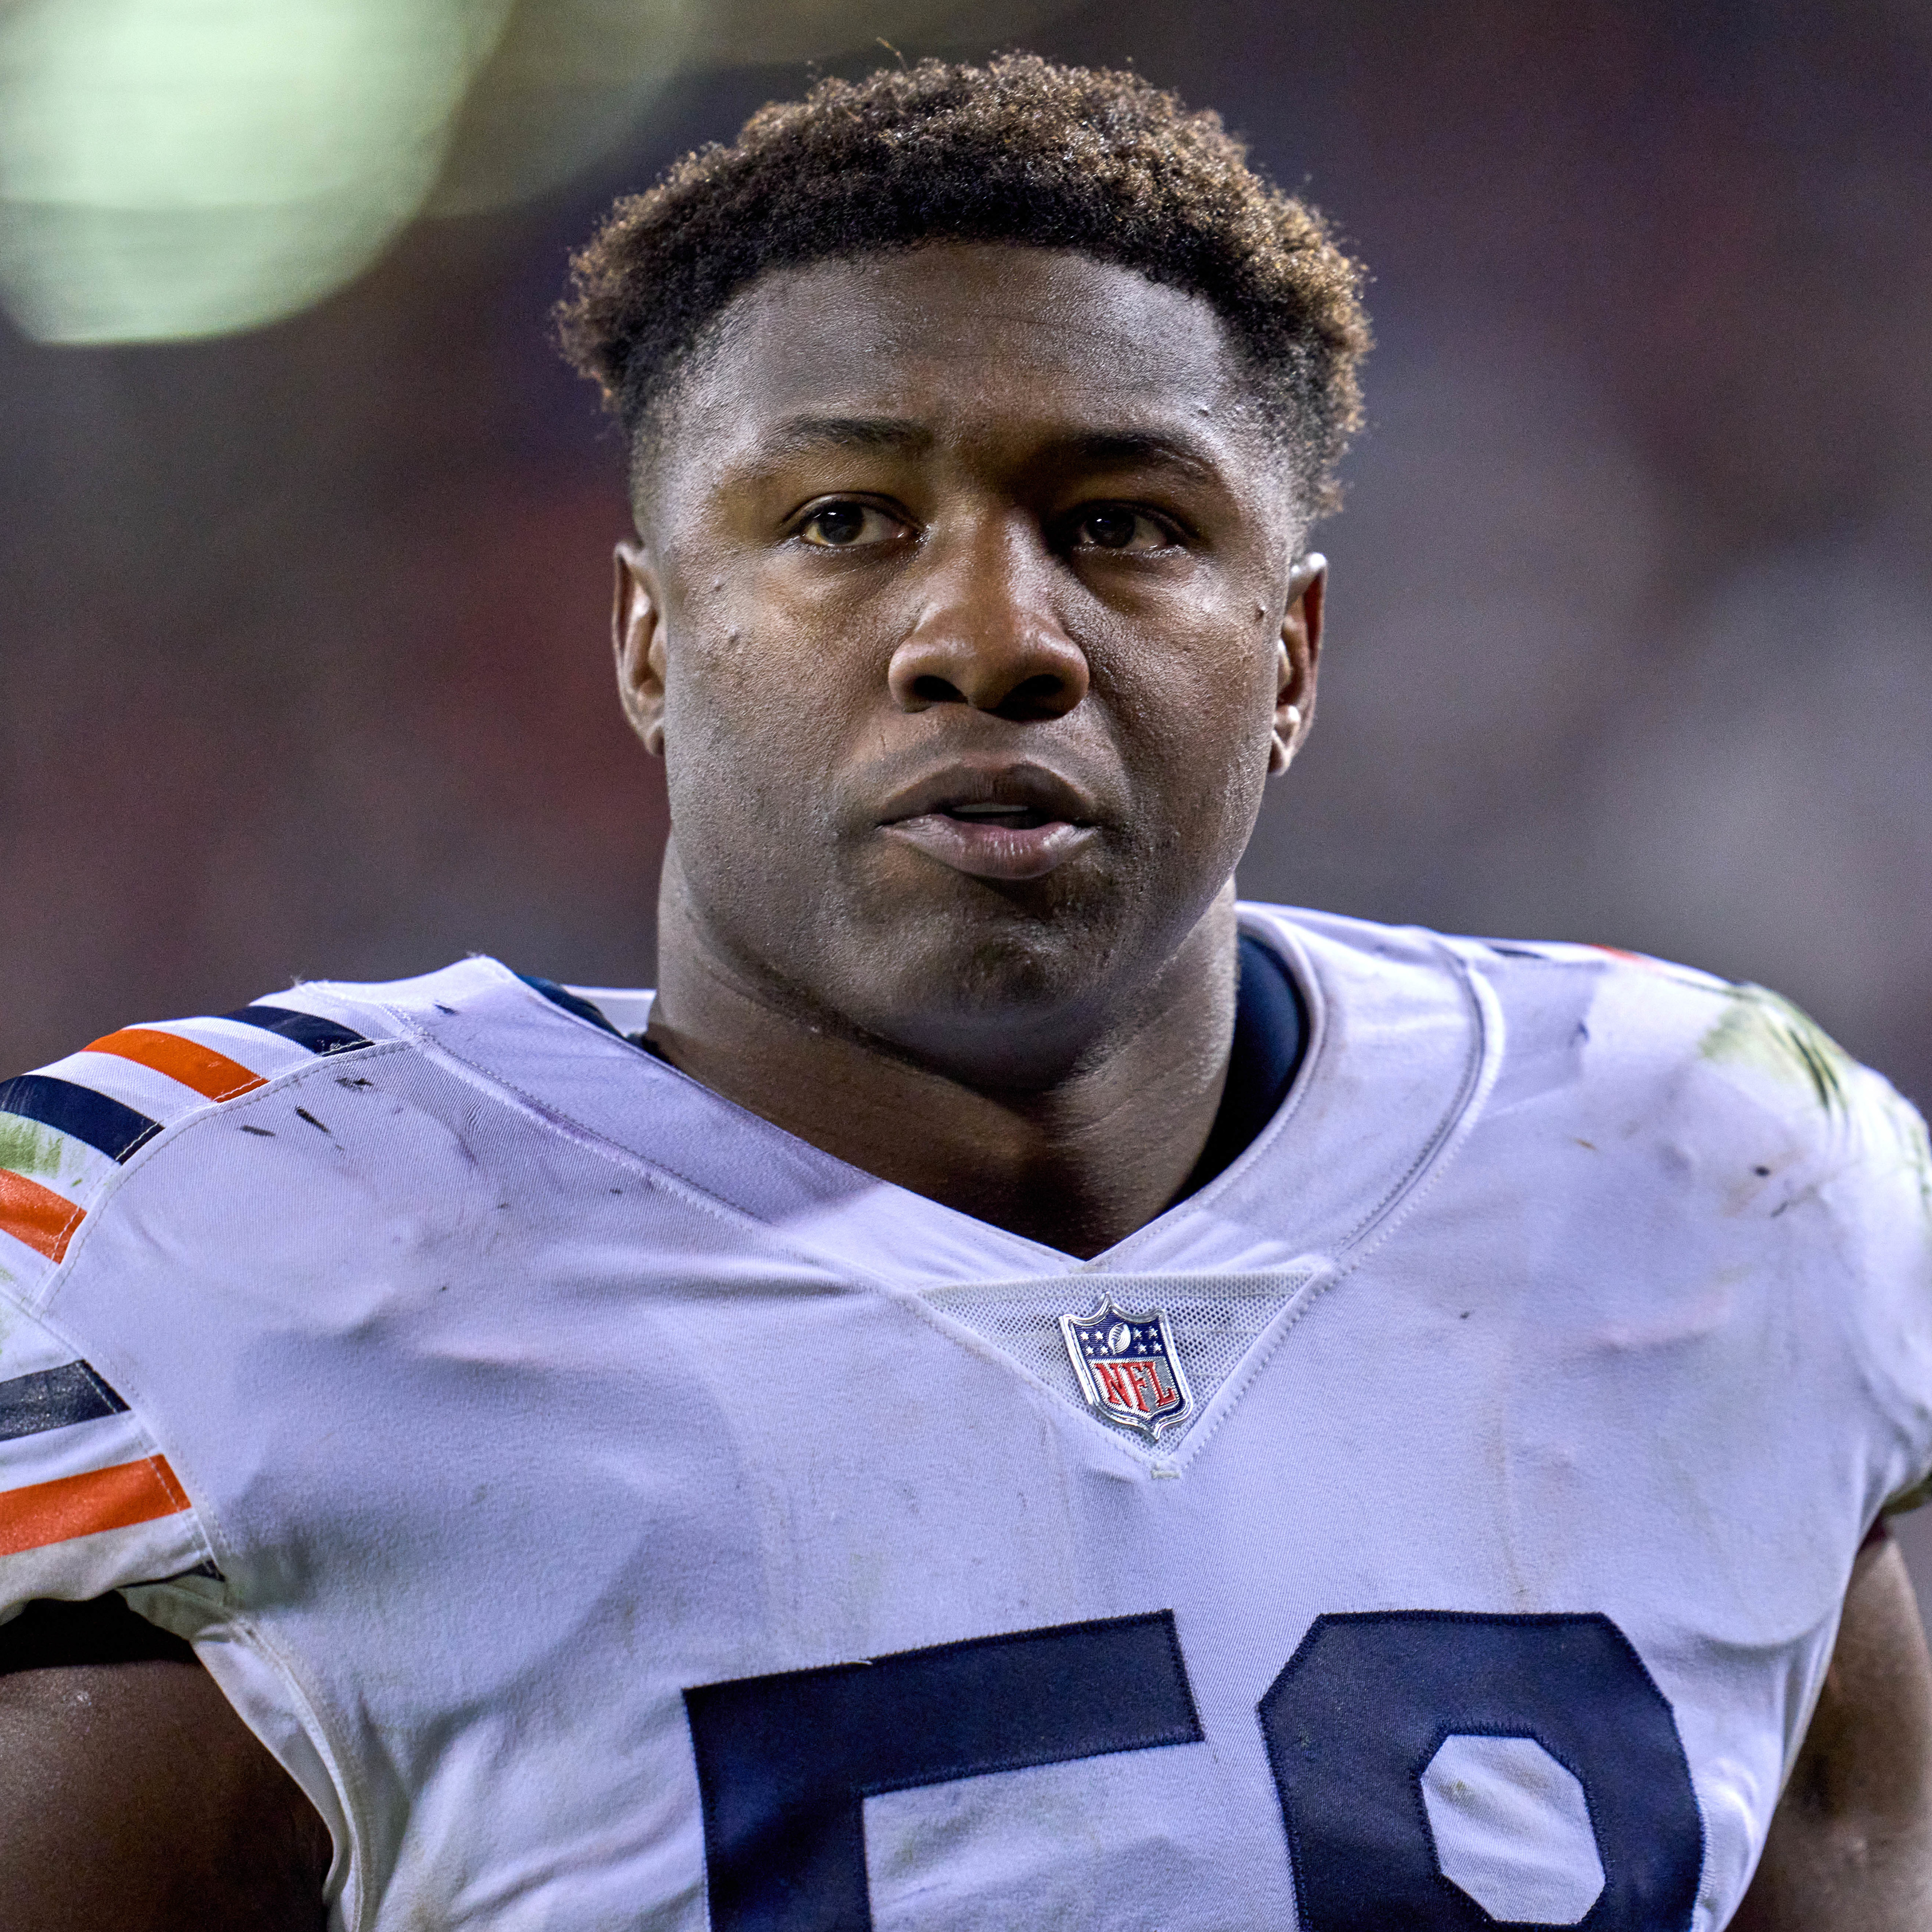 Bears Rumors: Roquan Smith Contract Talks Expected to 'Heat Up' This Summer